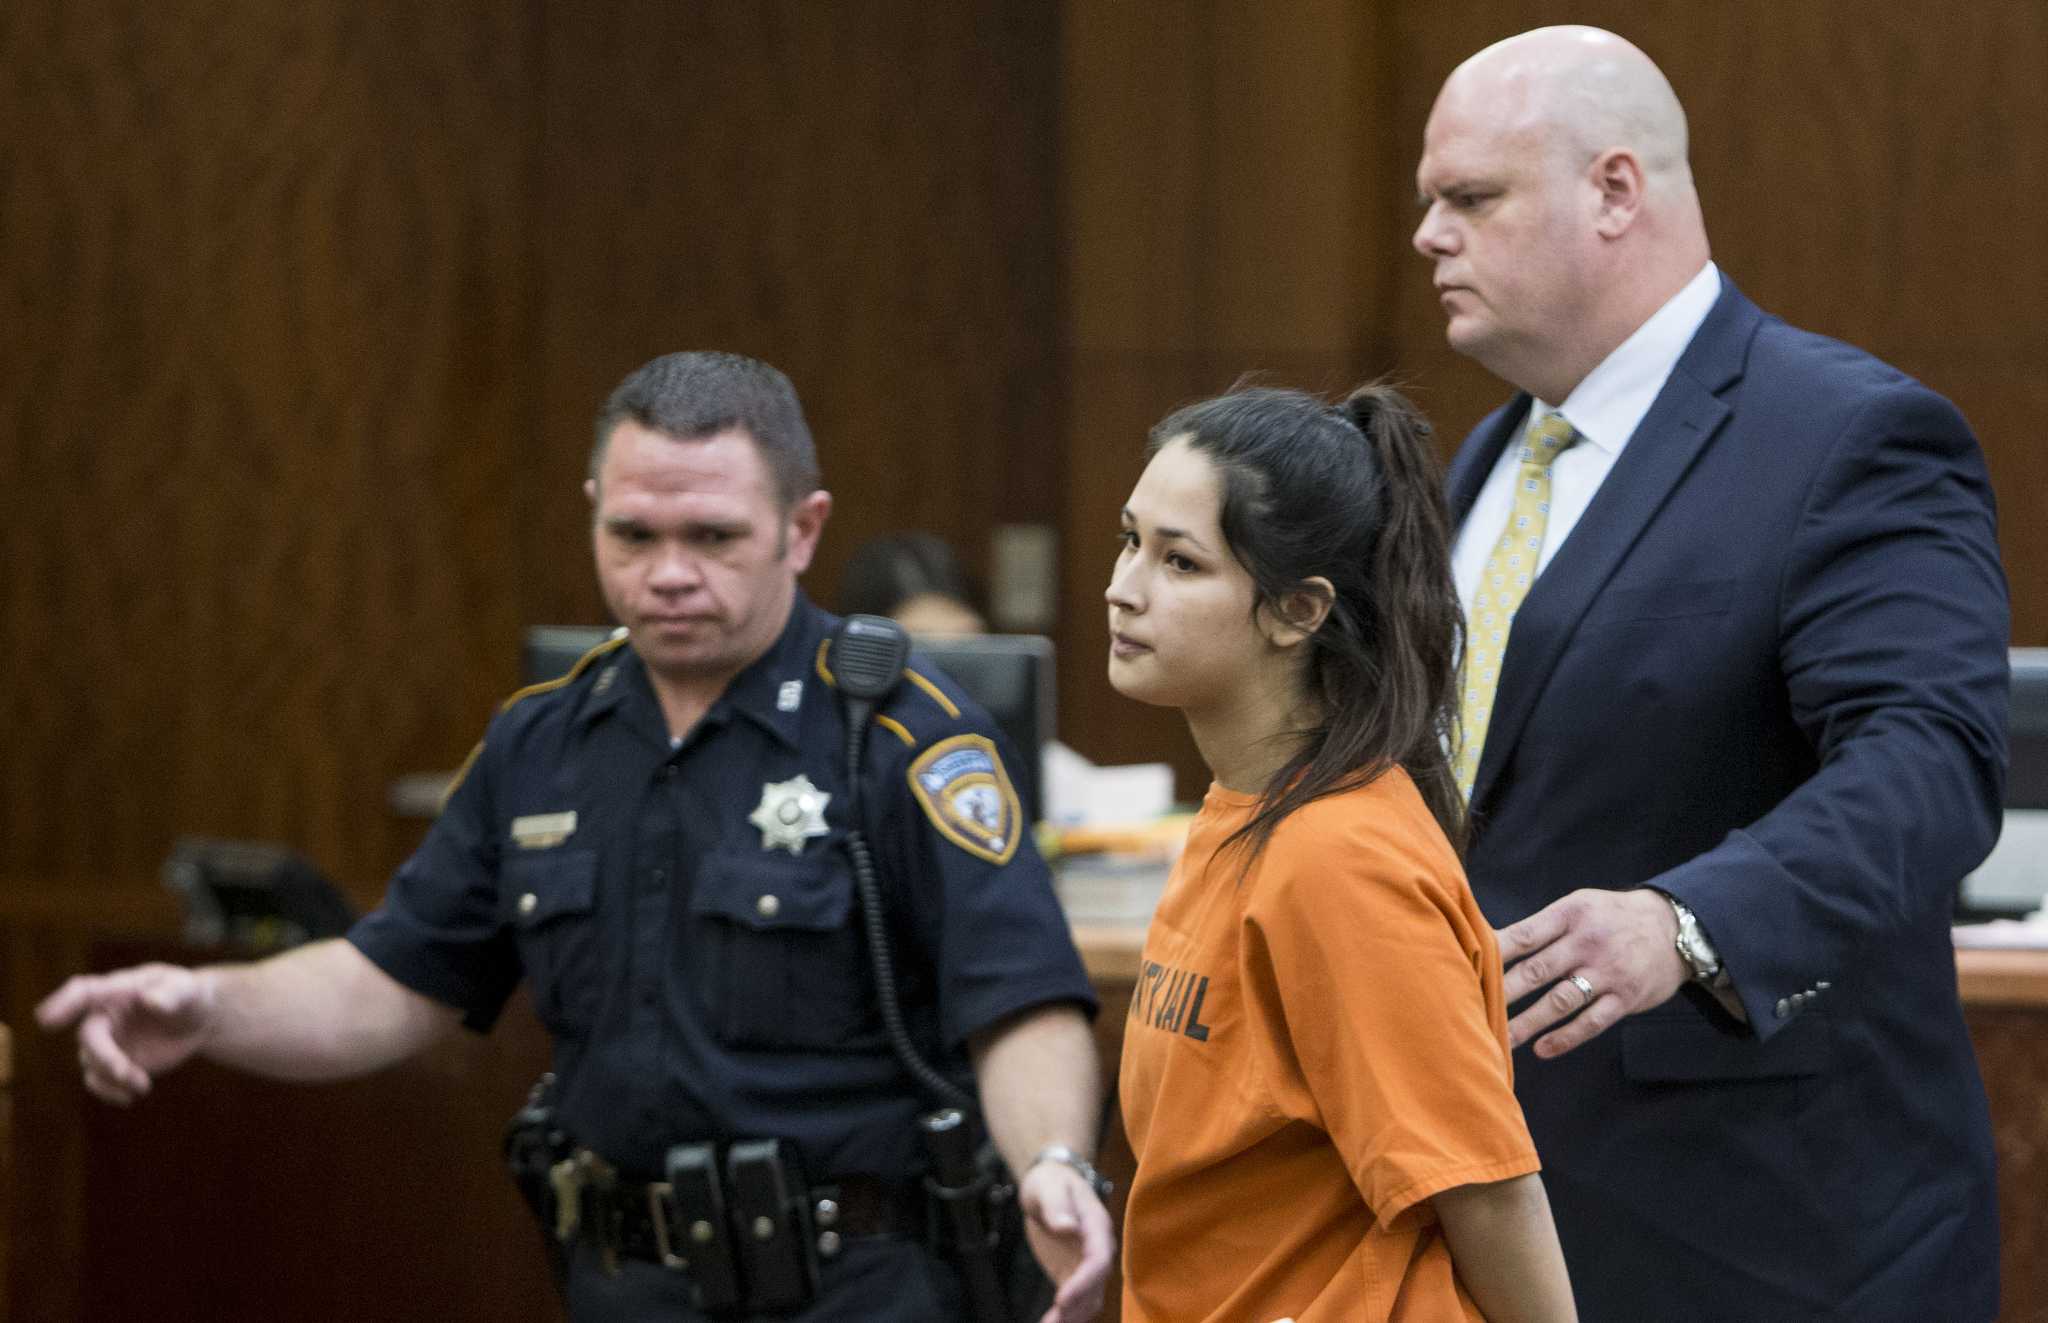 19 Year Old Woman Accused Of Pimping 14 Year Old Girl Appears In Court